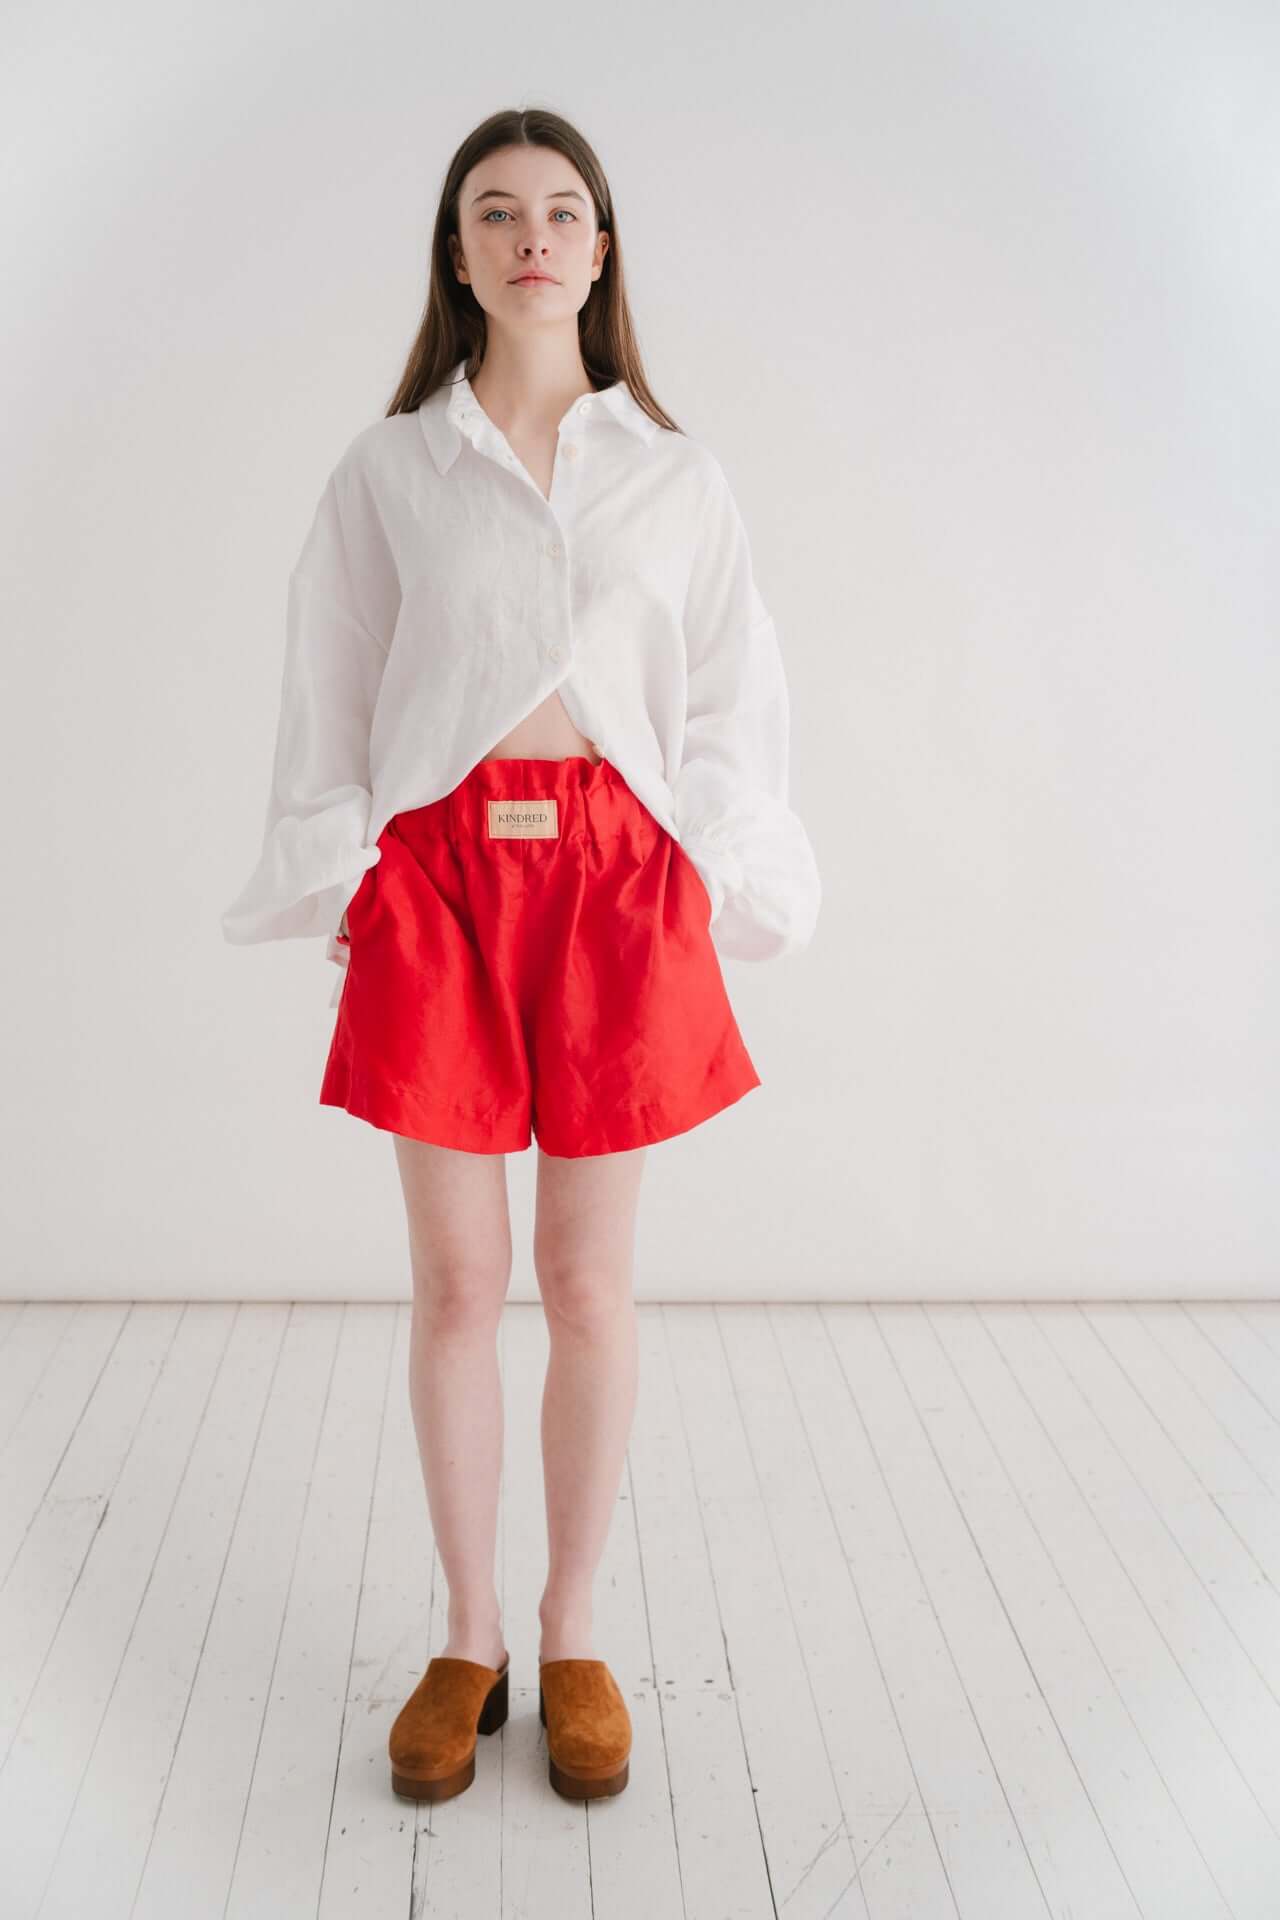 POPPY SHORTS | A simple yet bold statement in our Poppy shorts. For those days that you don’t want to think too much, but feel considered in your outfit choice. Pair with our Cadhla shirt or your favourite knitwear for an effortless summer look.